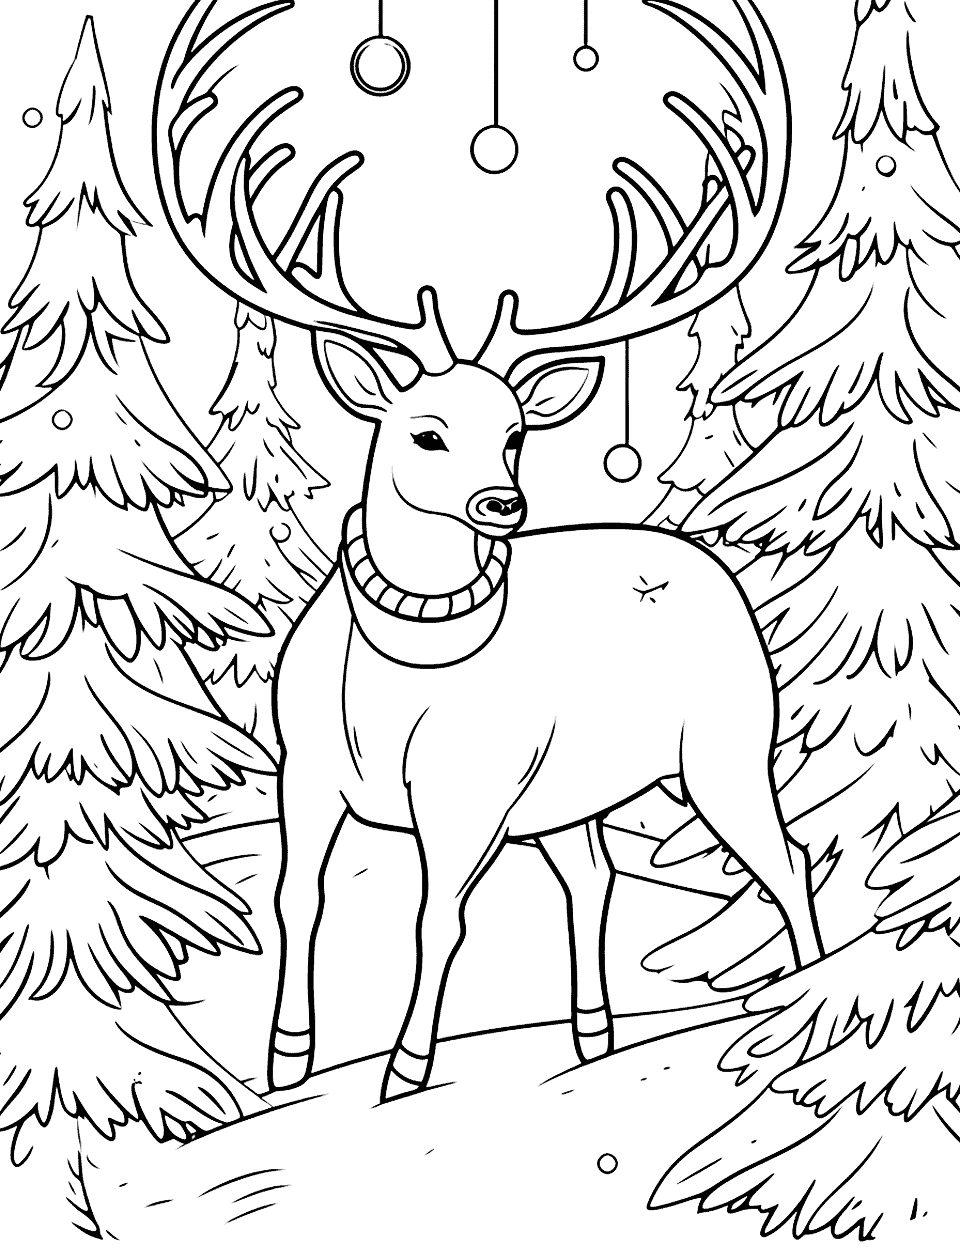 Reindeer in the Forest Christmas Coloring Page - A majestic reindeer adorned with Christmas lights standing amidst a snowy forest.